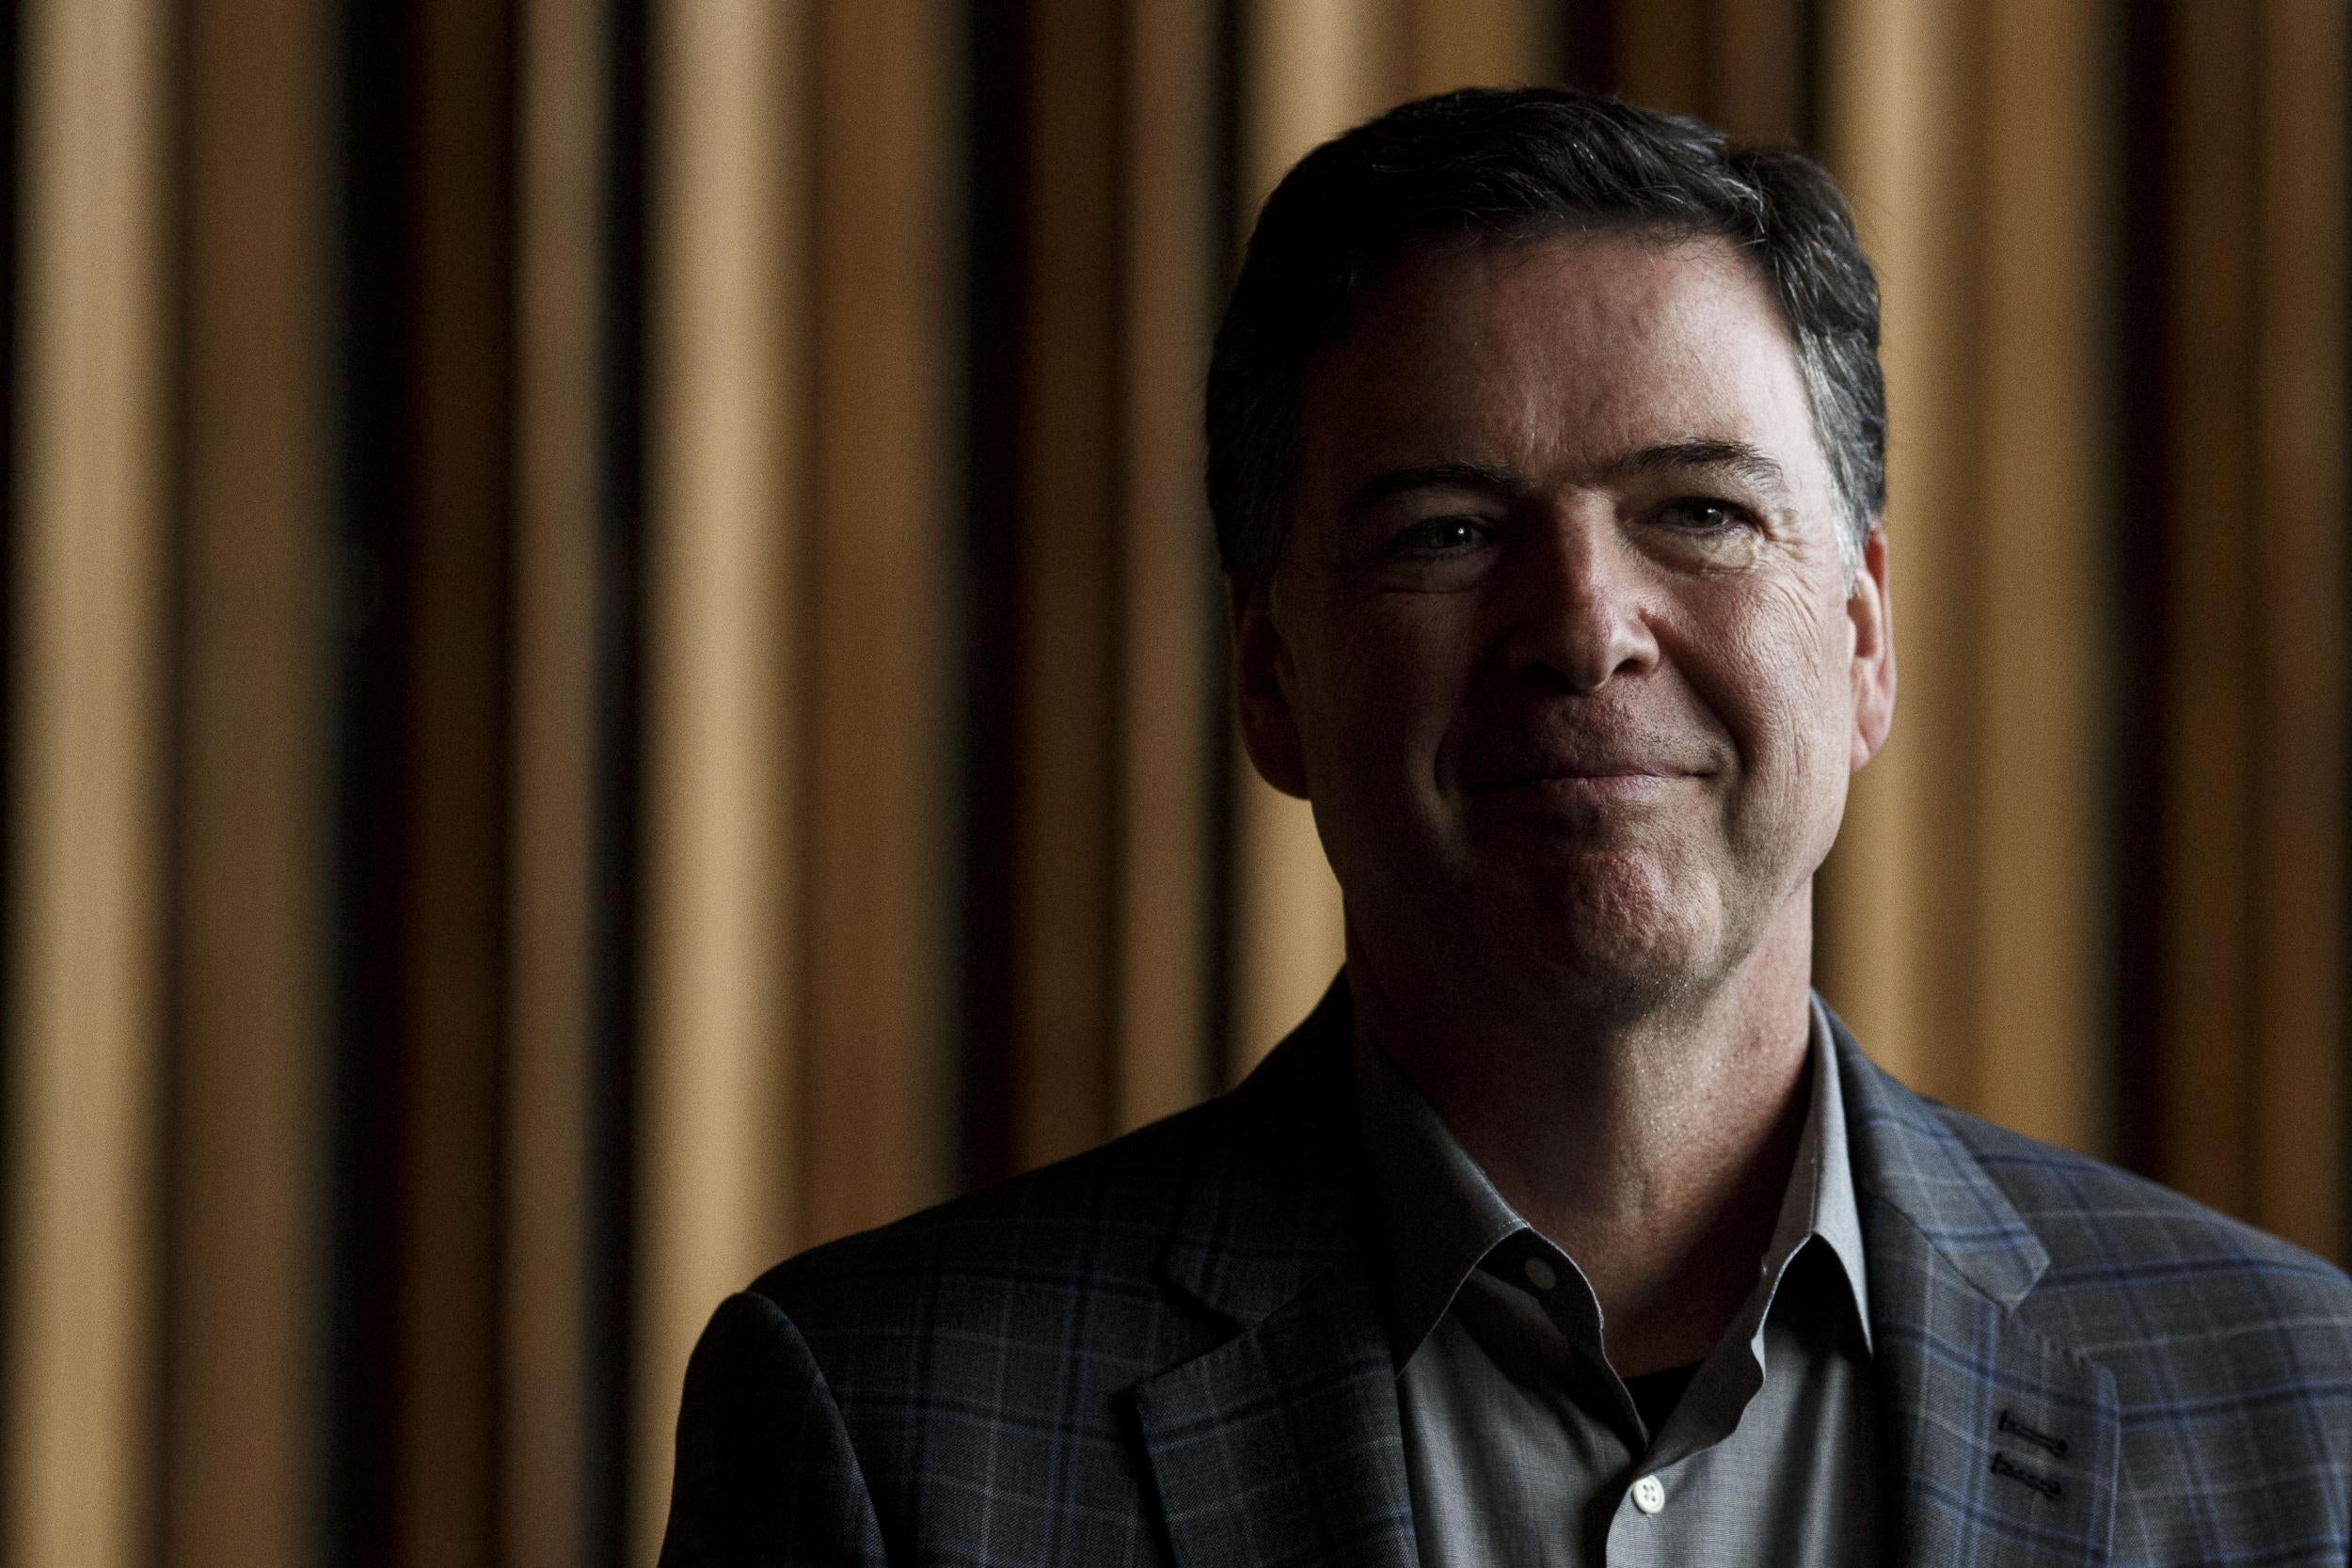 Former FBI Director James Comey is resisting a subpoena from House Republicans